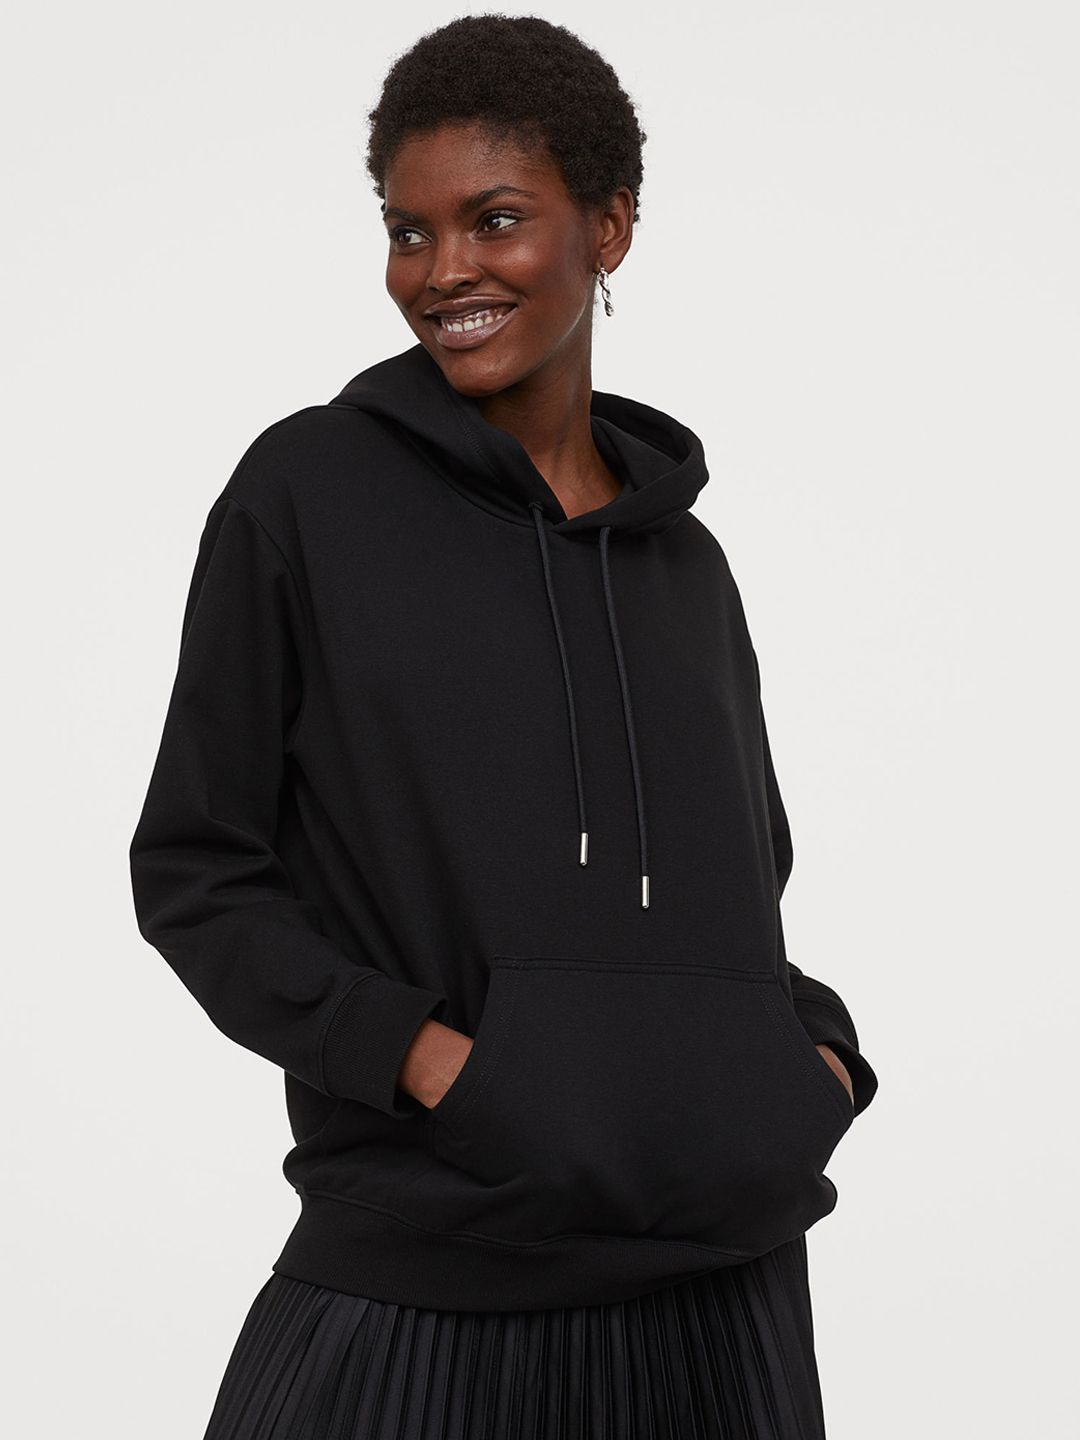 H&M Women Black Hooded Top Price in India